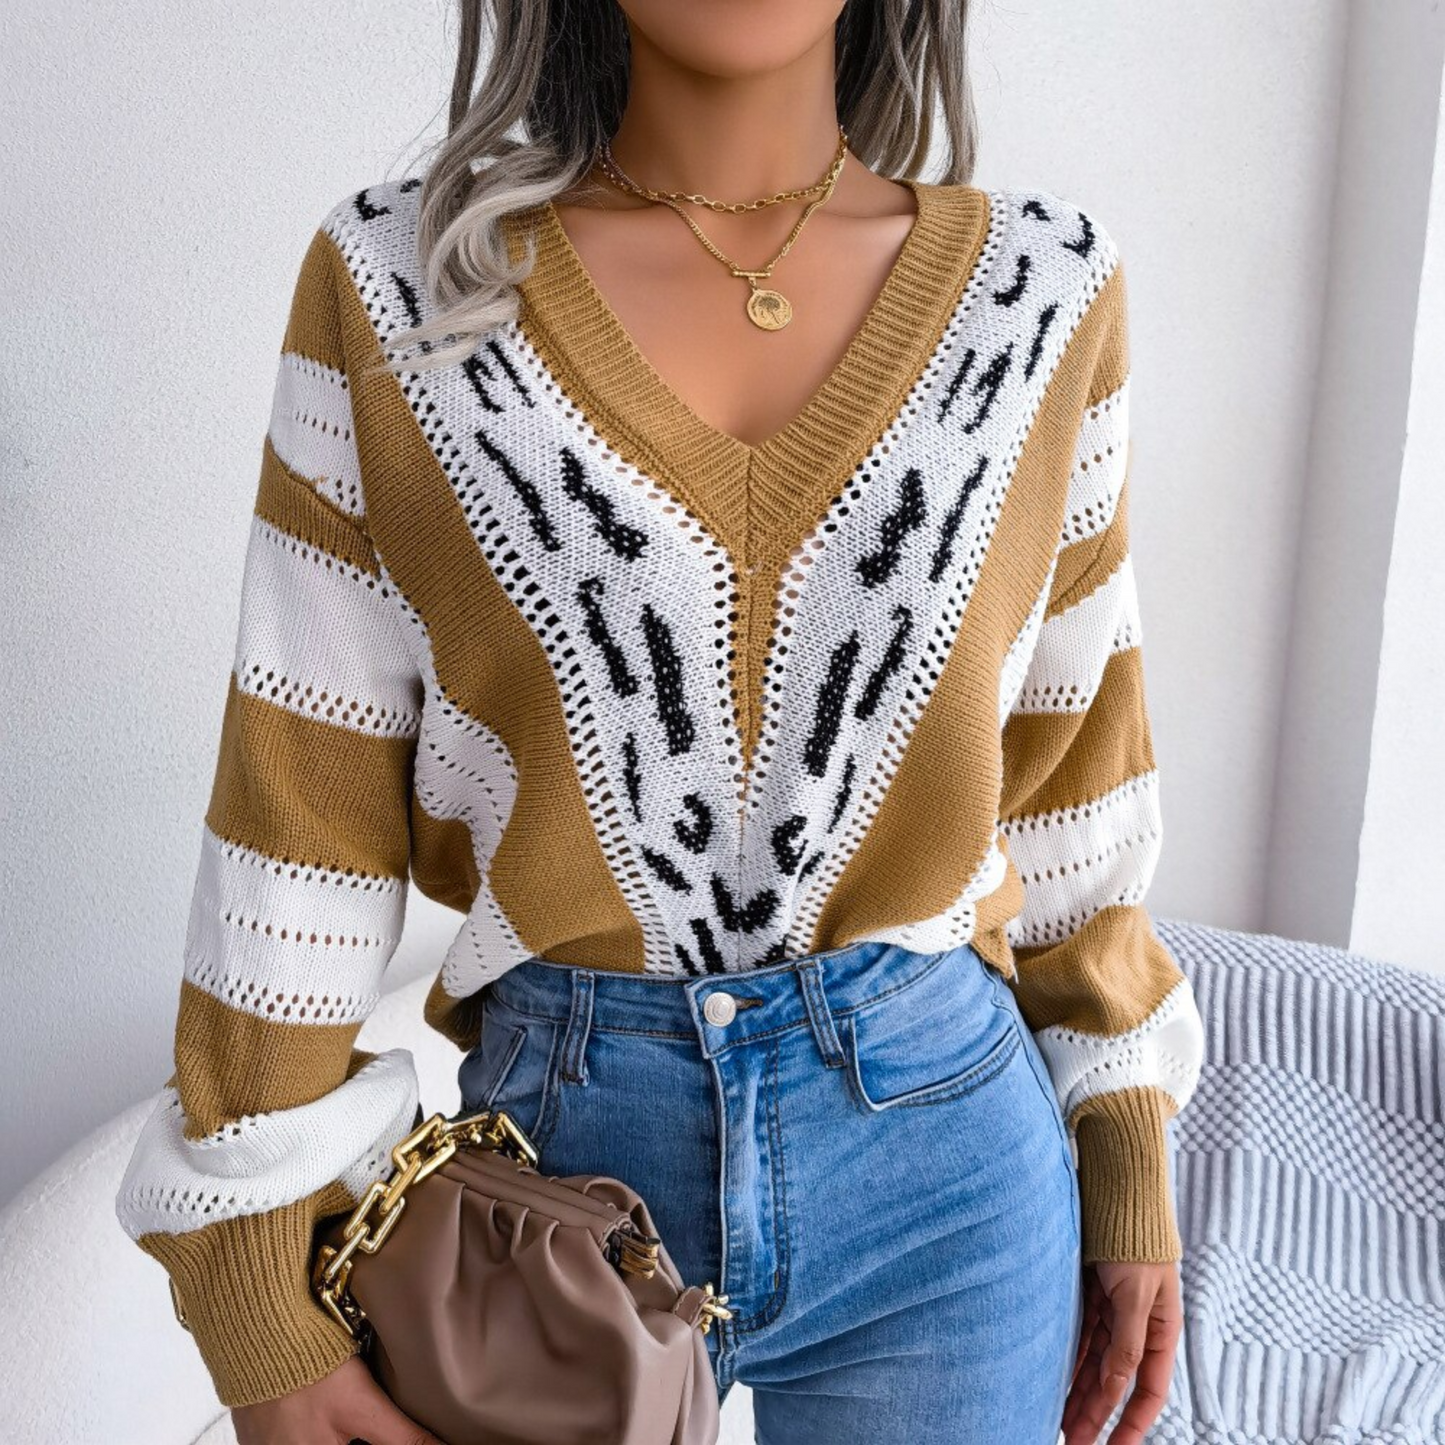 Harmony - Beige Knitted Leopard Print Paneled Sweater Top